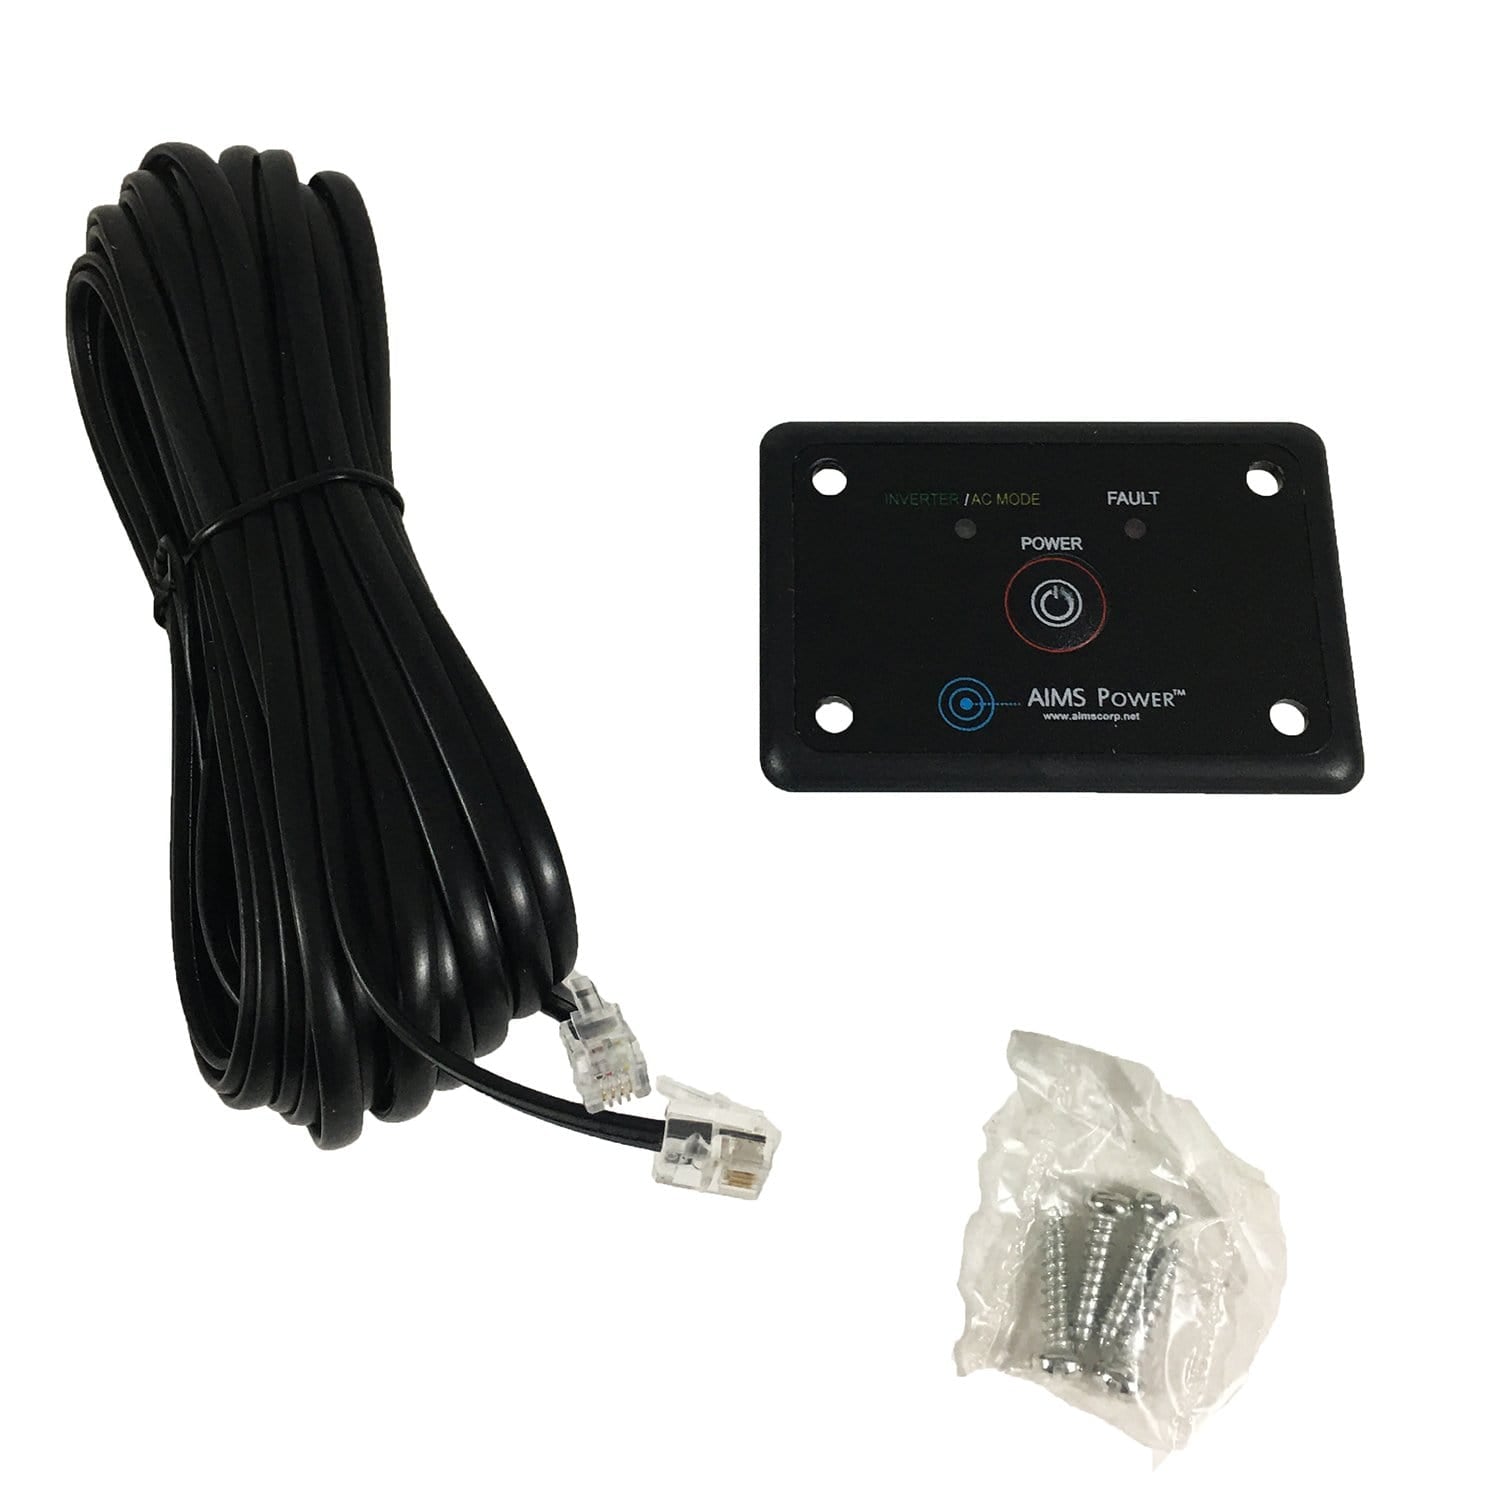 Aims Power REMOTEHF Flush Mount Inverter Power Remote On/Off Switch